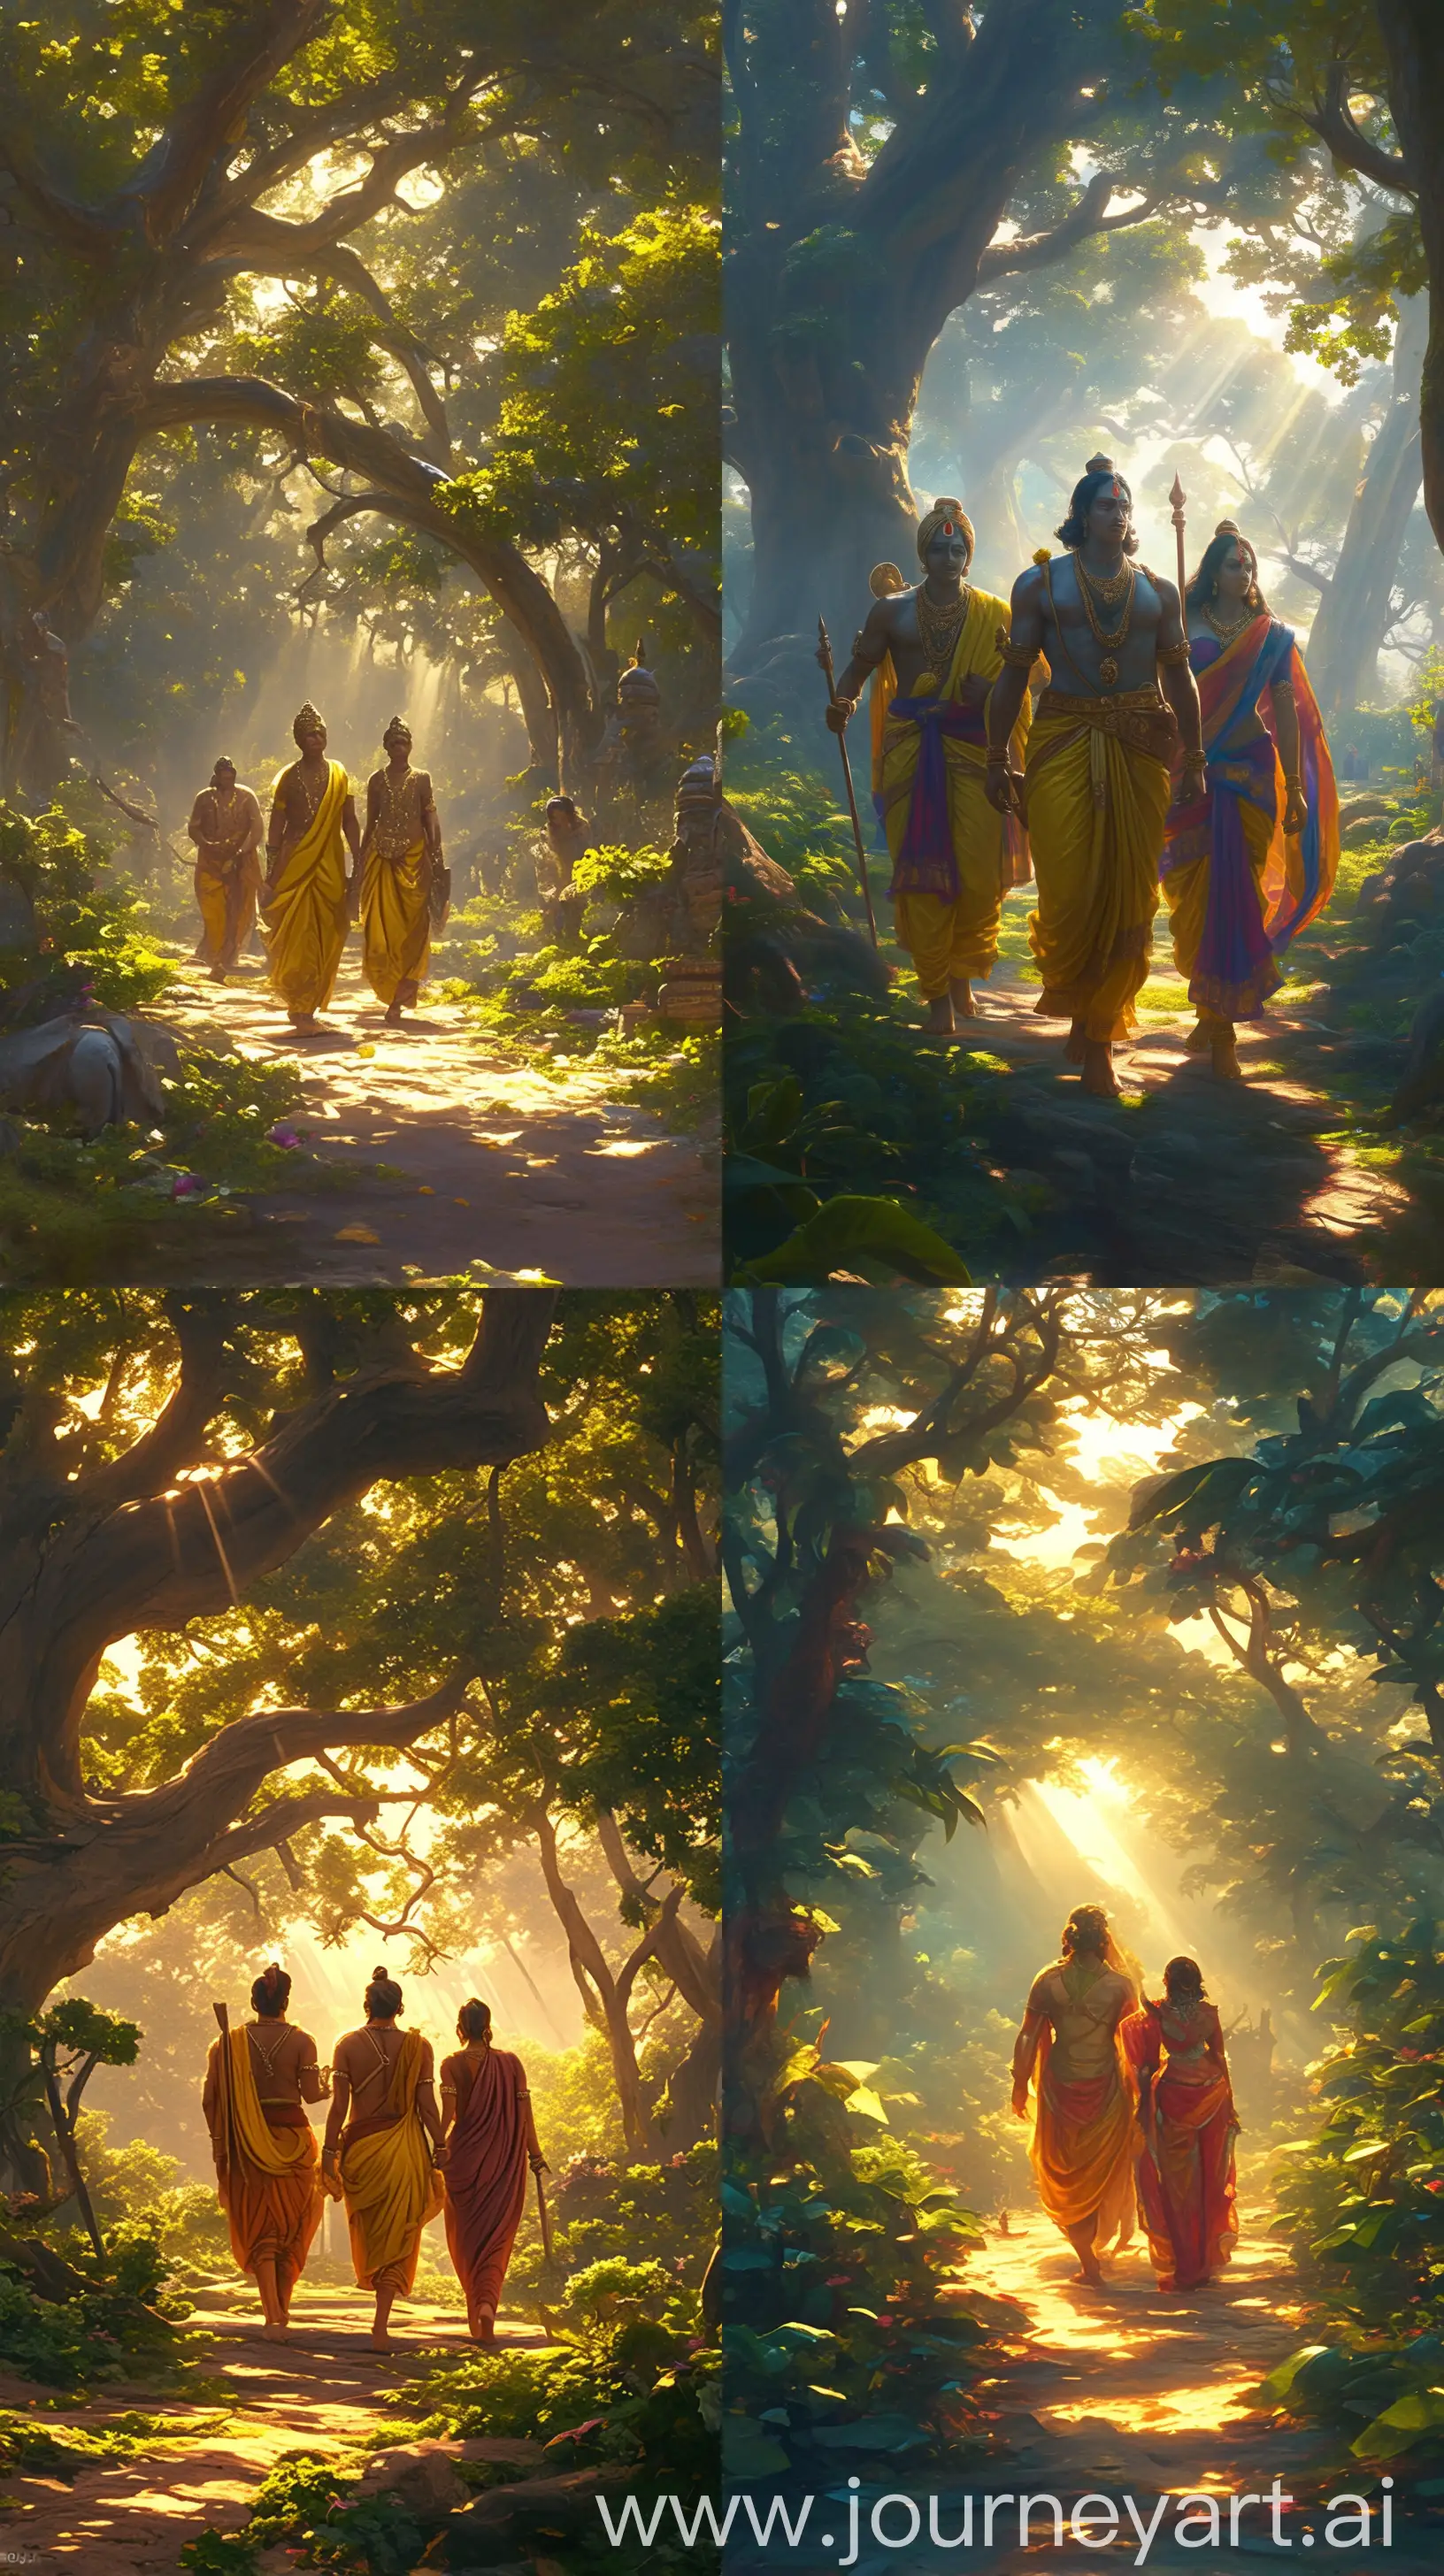 Realistic depiction of Ram, Lakshman, and Sita from Hindu epic Ramayana, walking through an ancient Indian forest, sun rays filtering through trees, elaborate traditional attire, serene expressions, high-resolution, attention to cultural authenticity, --ar 9:16 --s 200 --niji 6